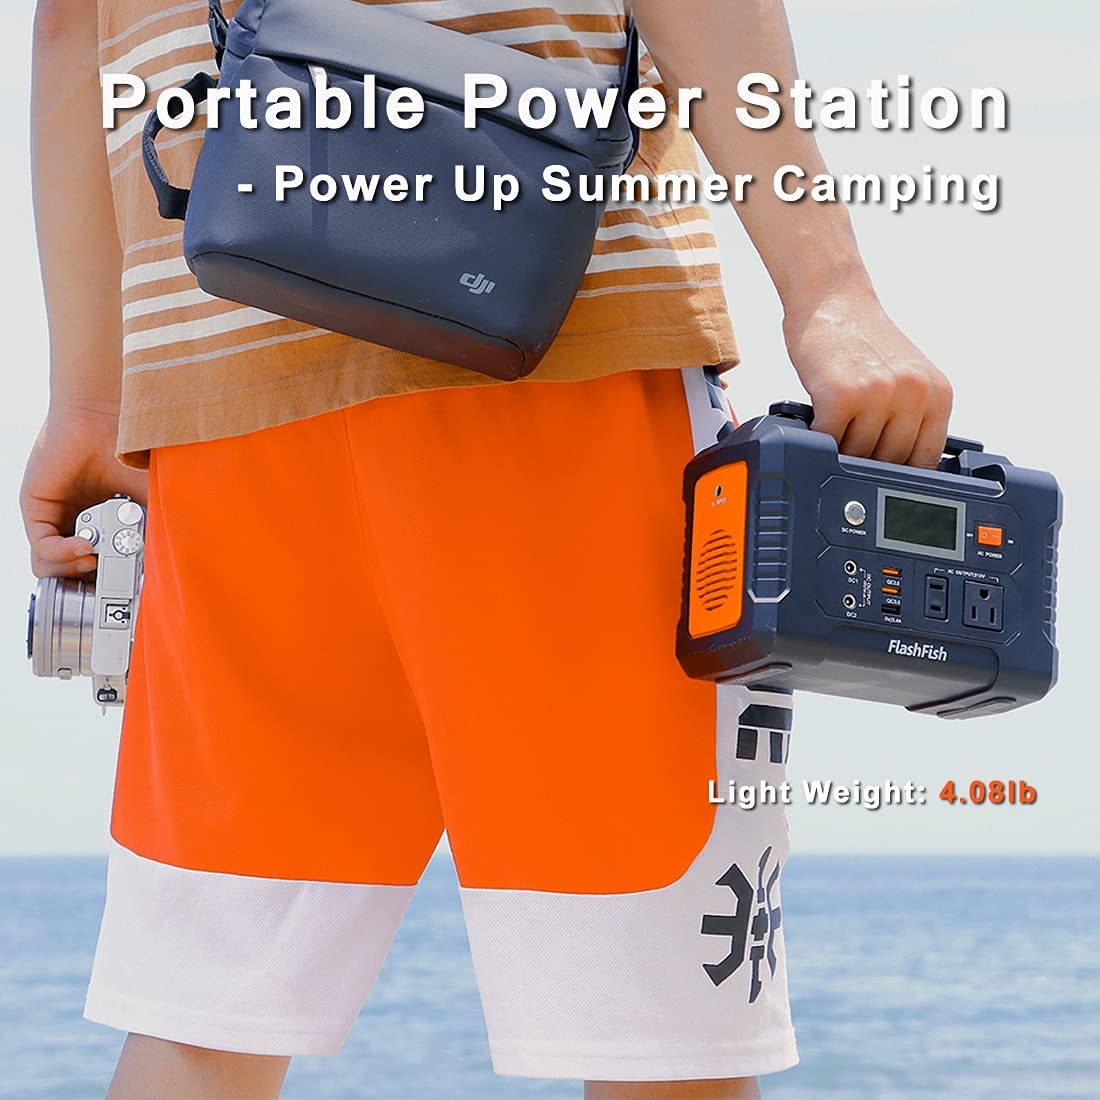 100-127V Portable Power Station Solar Generator 200W 151WH 40800mAh FlashFish Battery Charger Outdoor Fishing Electric Supply